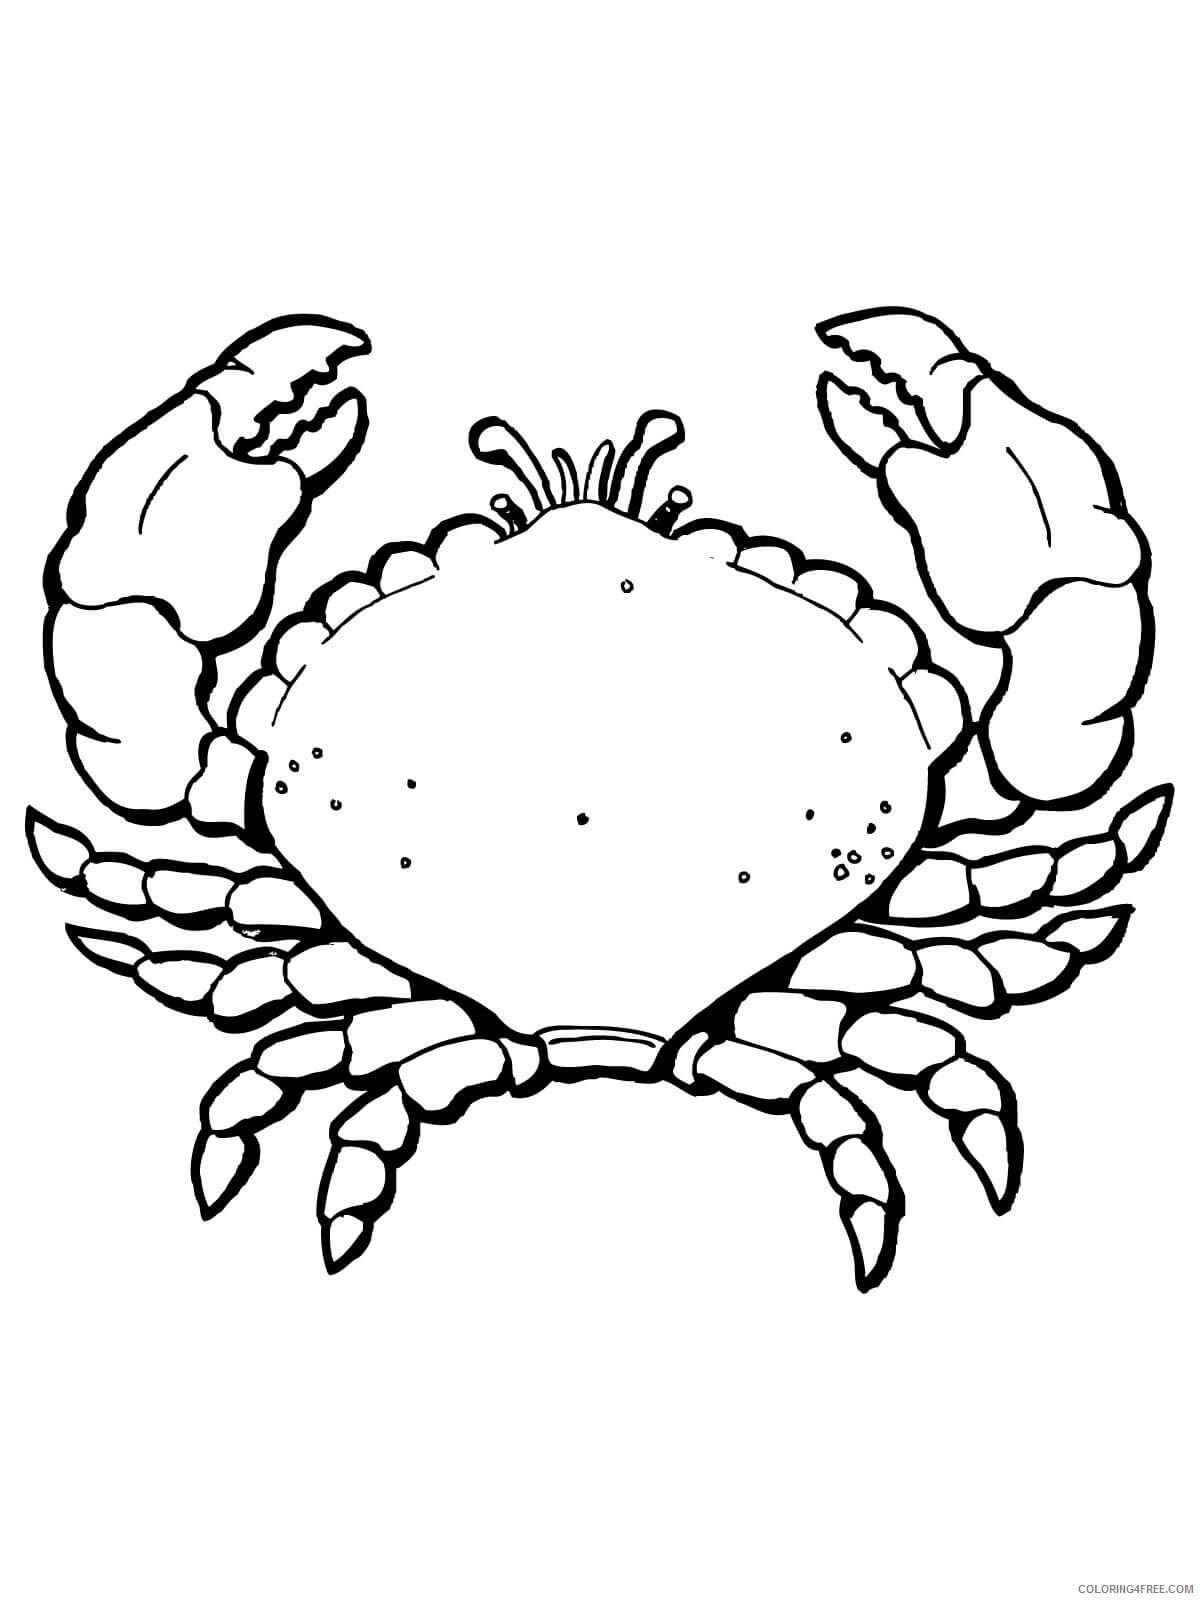 Crab Coloring Pages Animal Printable Sheets shrewd crabs with big claws 2021 Coloring4free